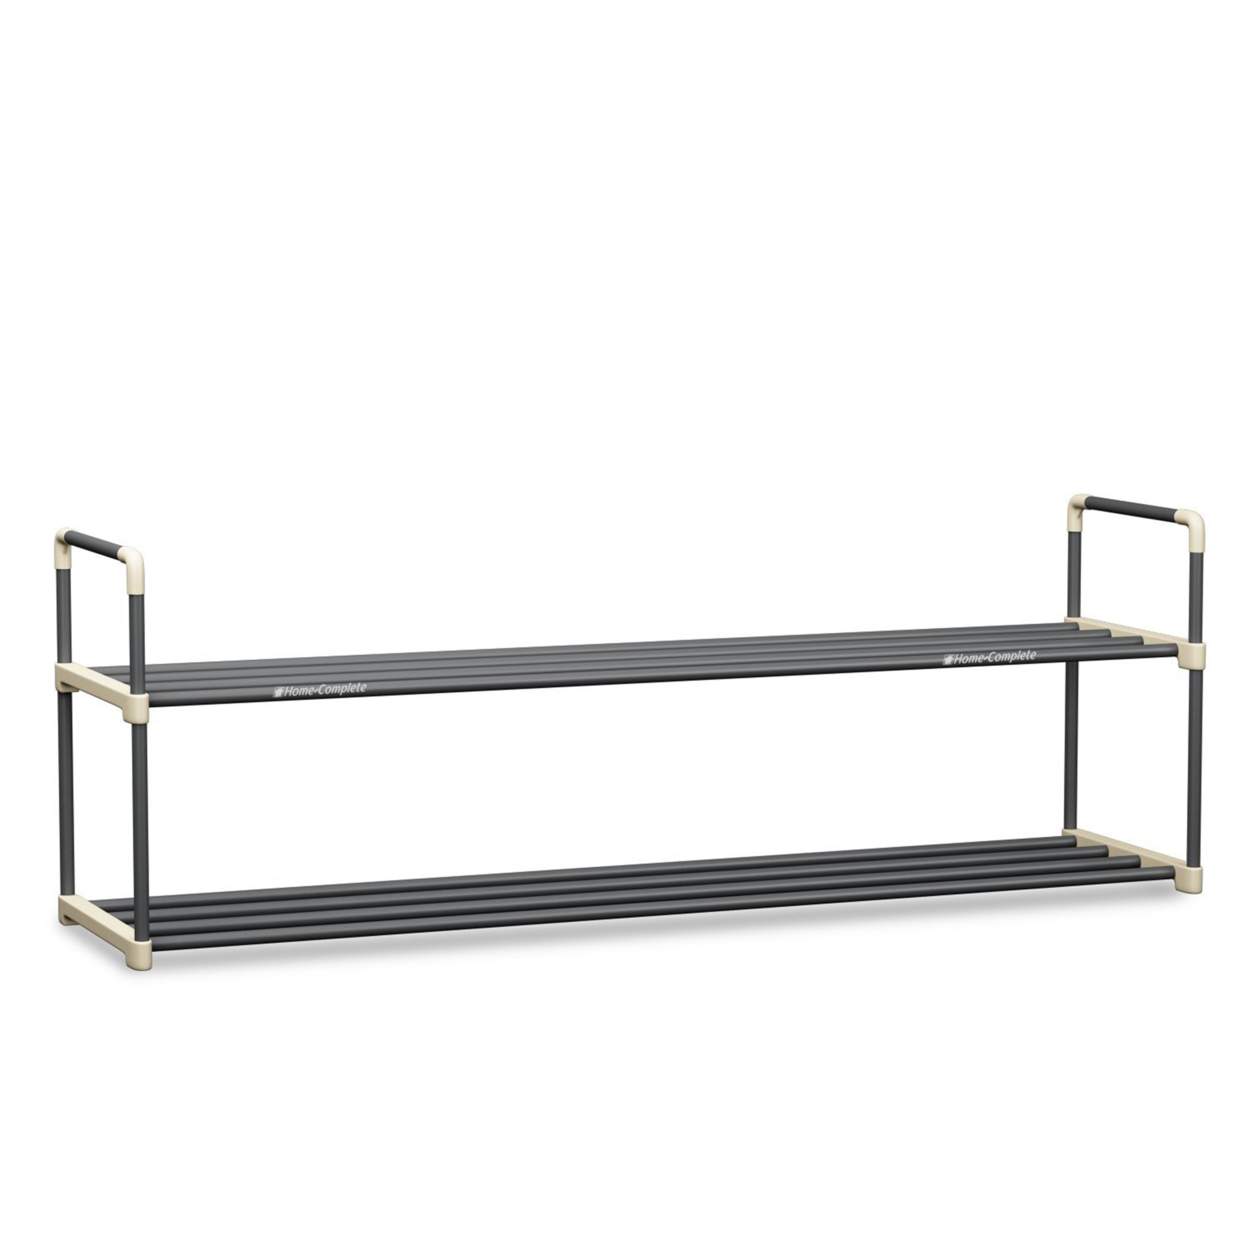 Shoe Rack With 2 Shelves Two Tiers For 12 Pairs For Bedroom, Entryway, Hallway, And Closet- Space Saving Storage